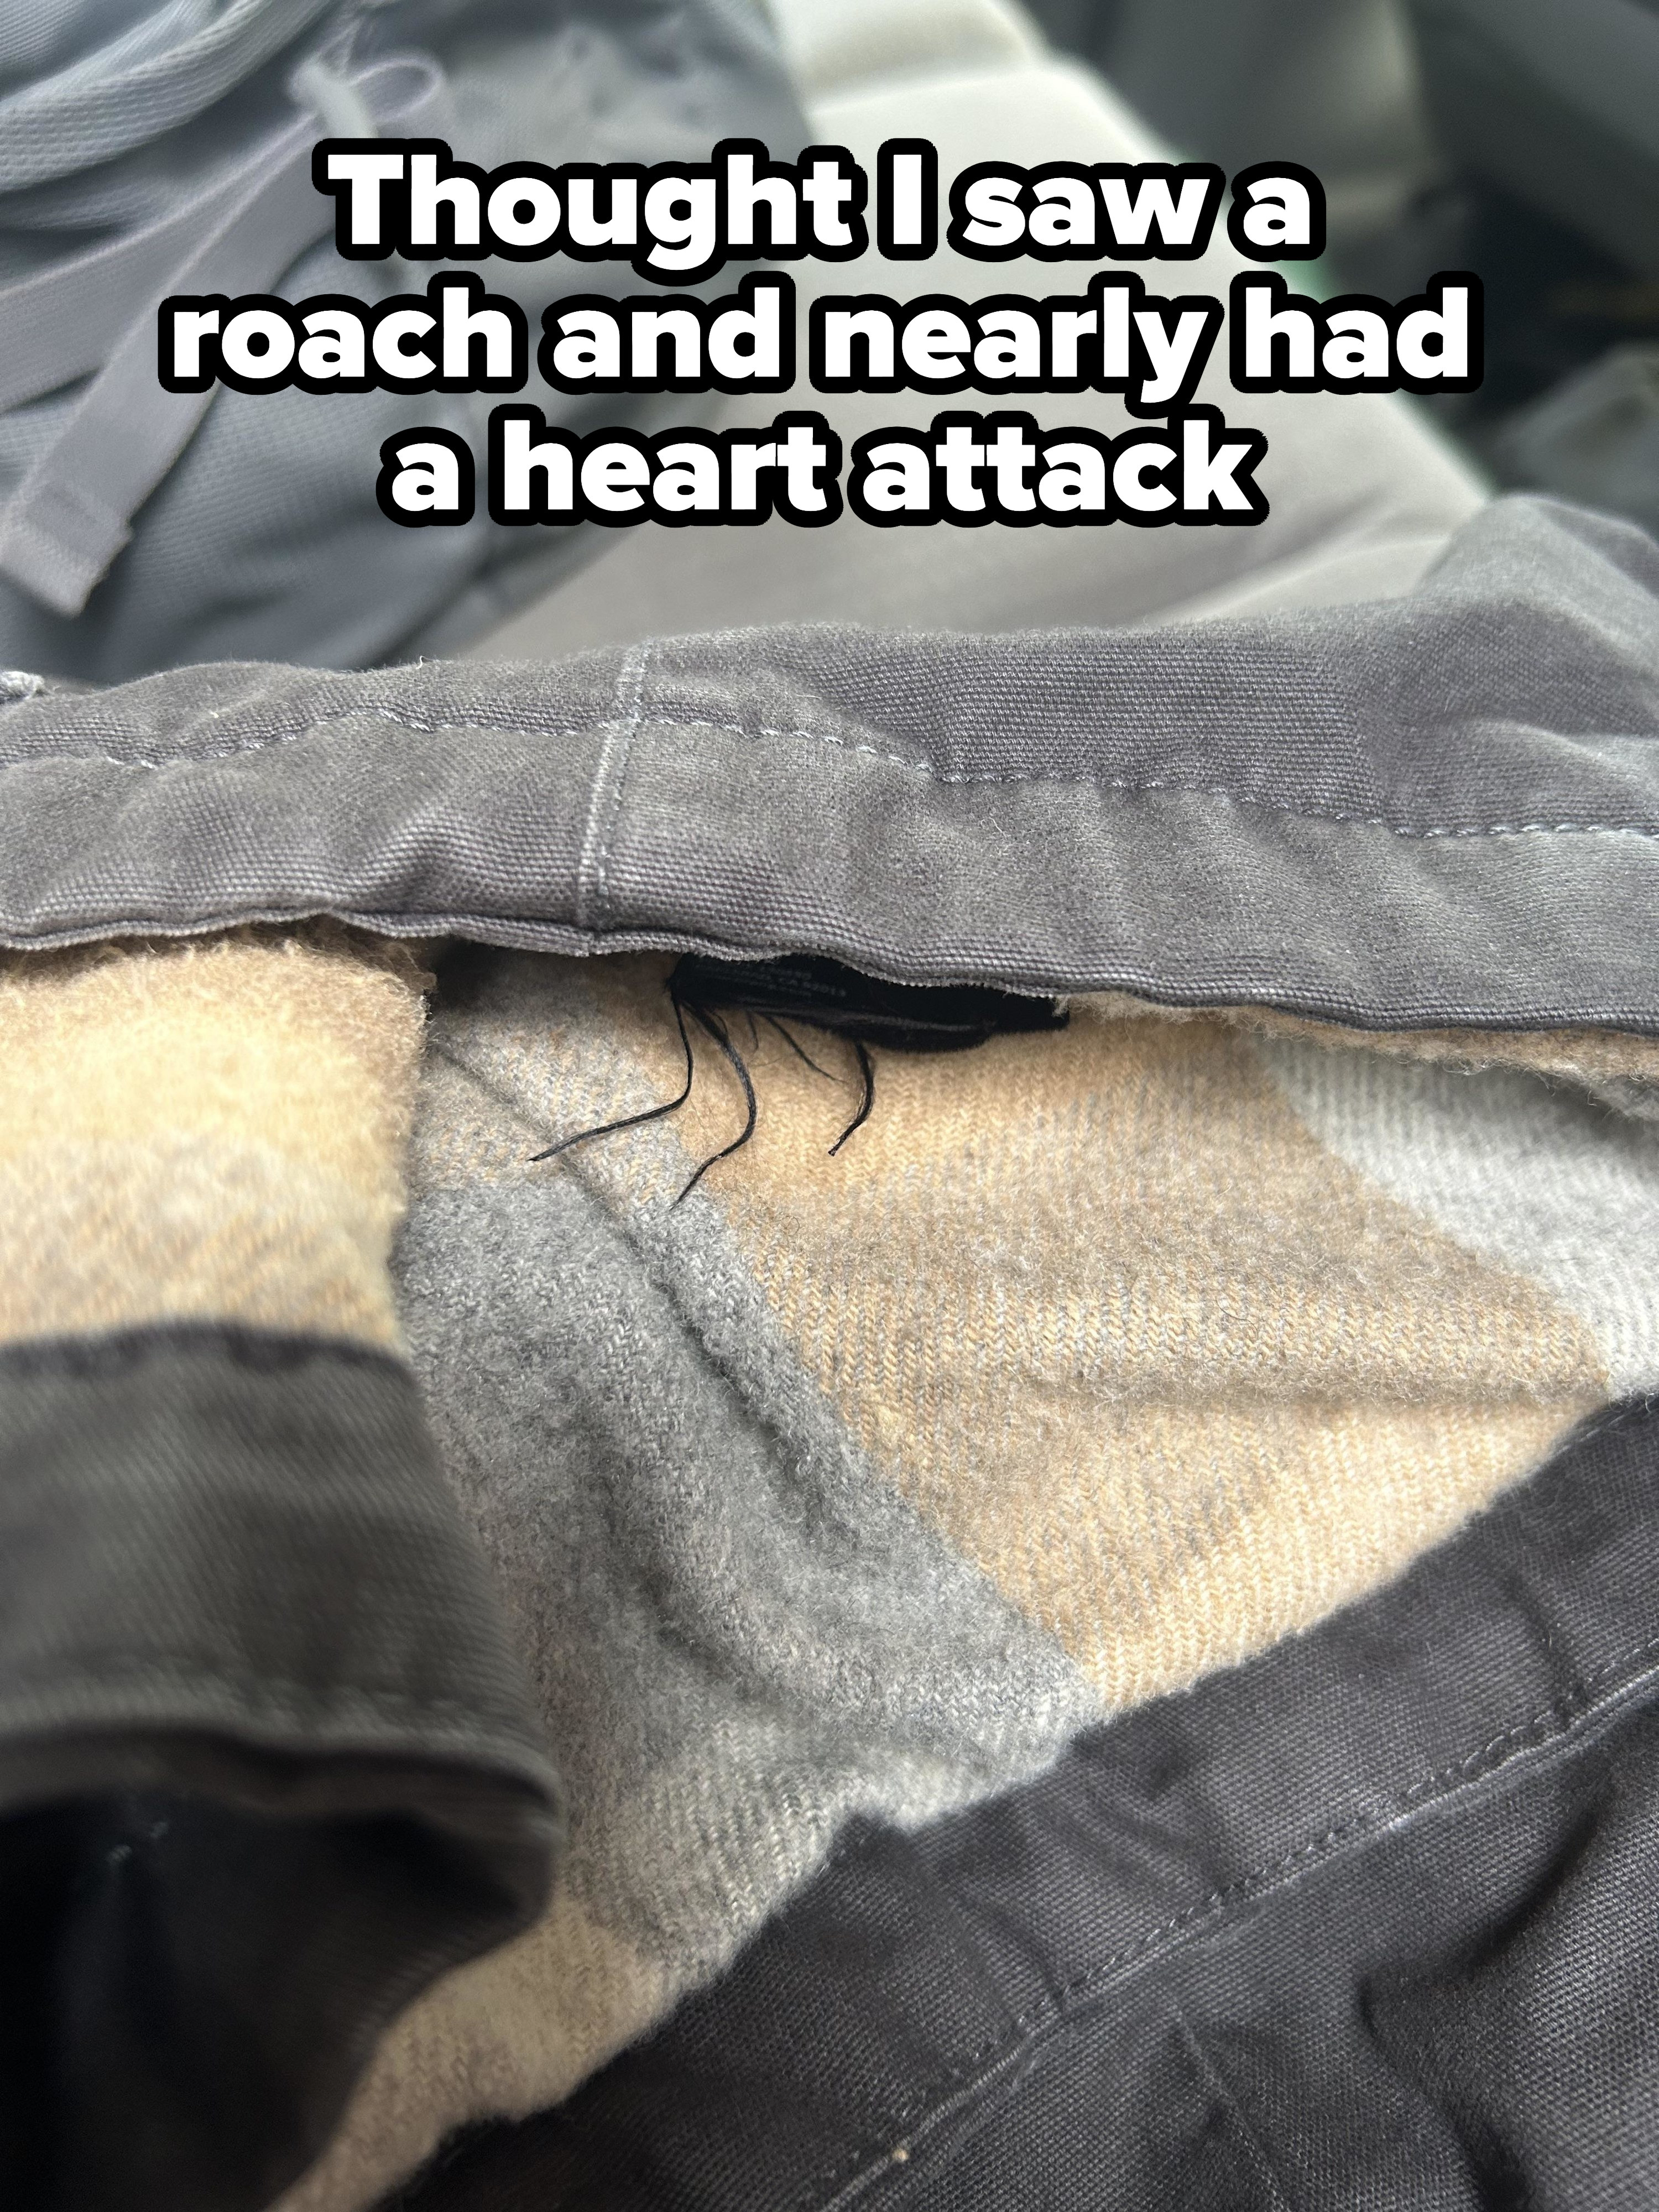 Jacket fiber that looks like the tentacles of a large roach